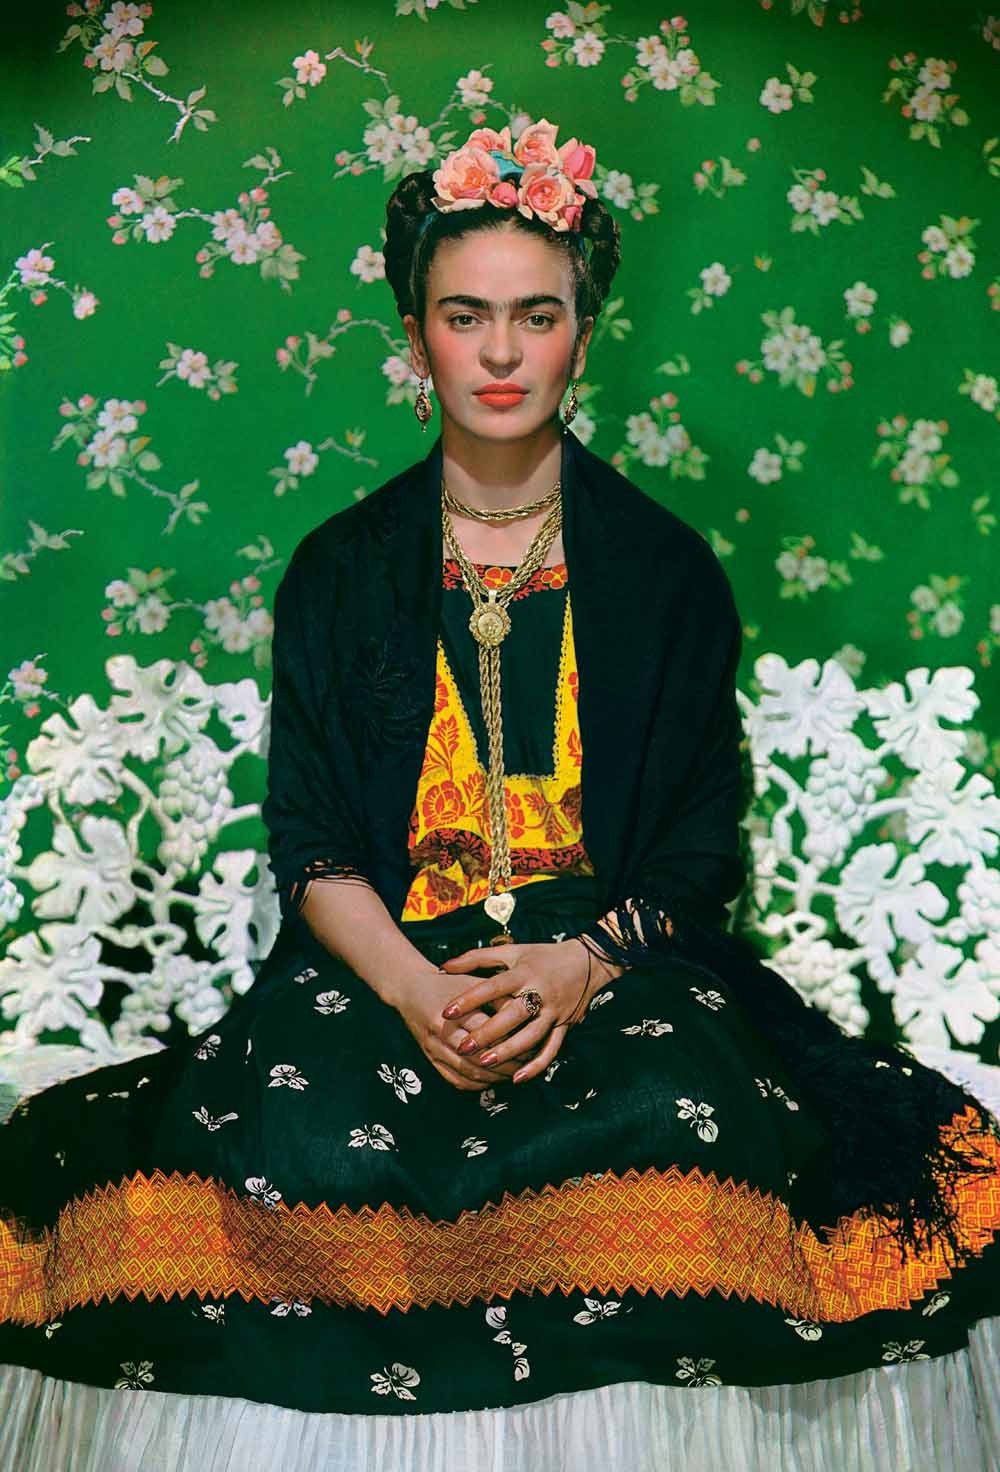 frida kahlo on a bench carbon print 1938 photo by nickolas muray c the jacques and natasha gelman collection of 20th century mexican art and the verge nickolas muray photo archives